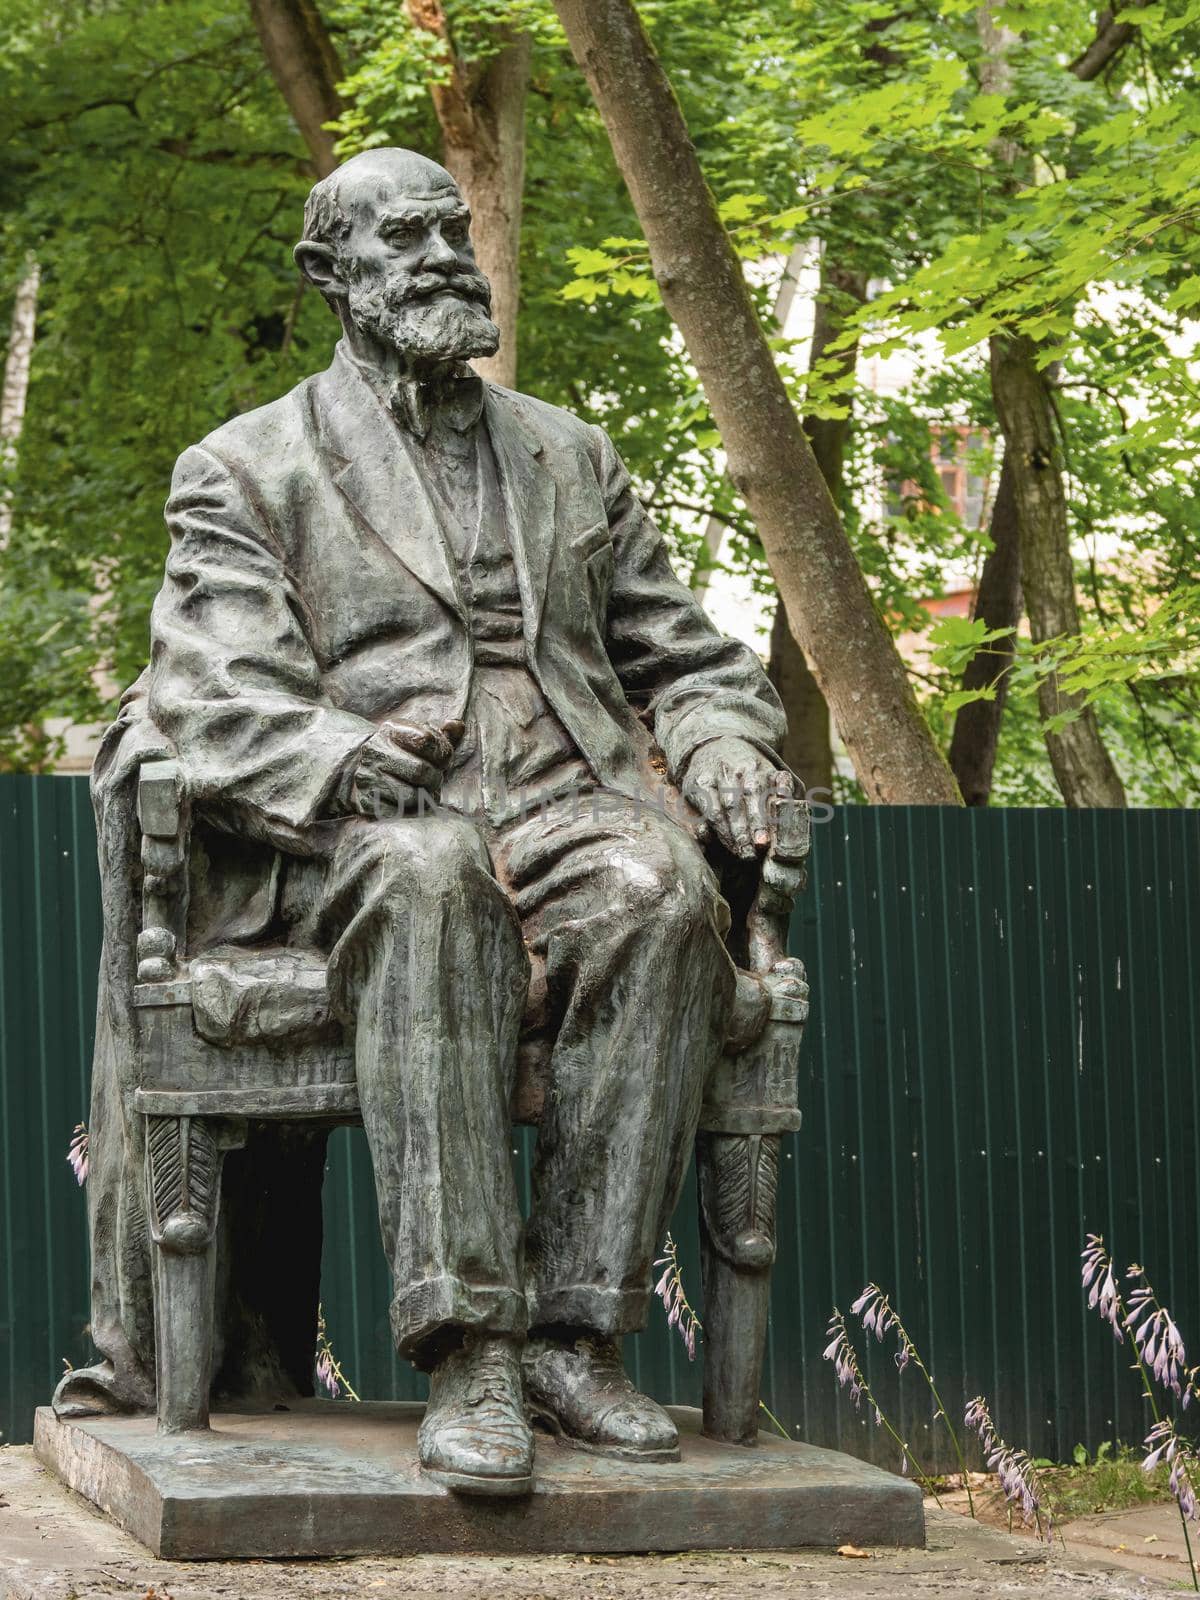 SVETLOGORSK, RUSSIA - July 21, 2019. Monument to famous Russian scientist and physiologist Pavlov I.P. by aksenovko